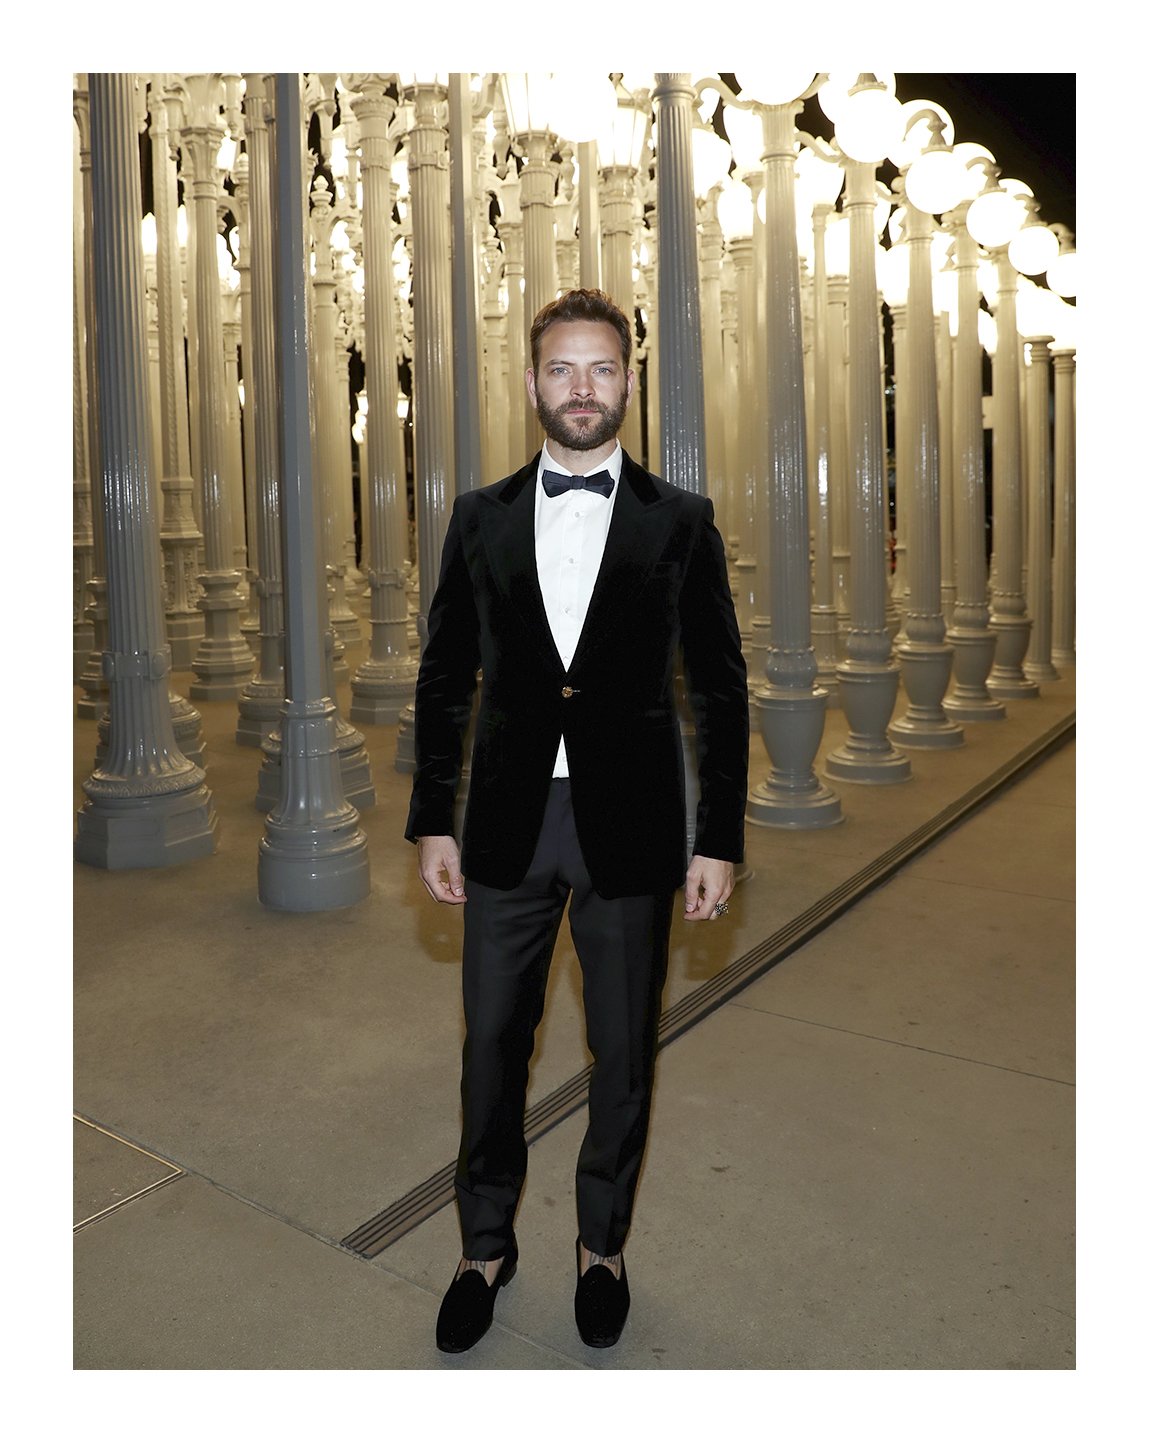 tilskuer klassekammerat Anvendt gucci on X: "To the Eighth annual Art+Film Gala, actor @AleBorghi_ wore a  velvet one button peak lapel formal jacket with a piqué evening shirt, black  trousers with grosgrain detail, satin bow